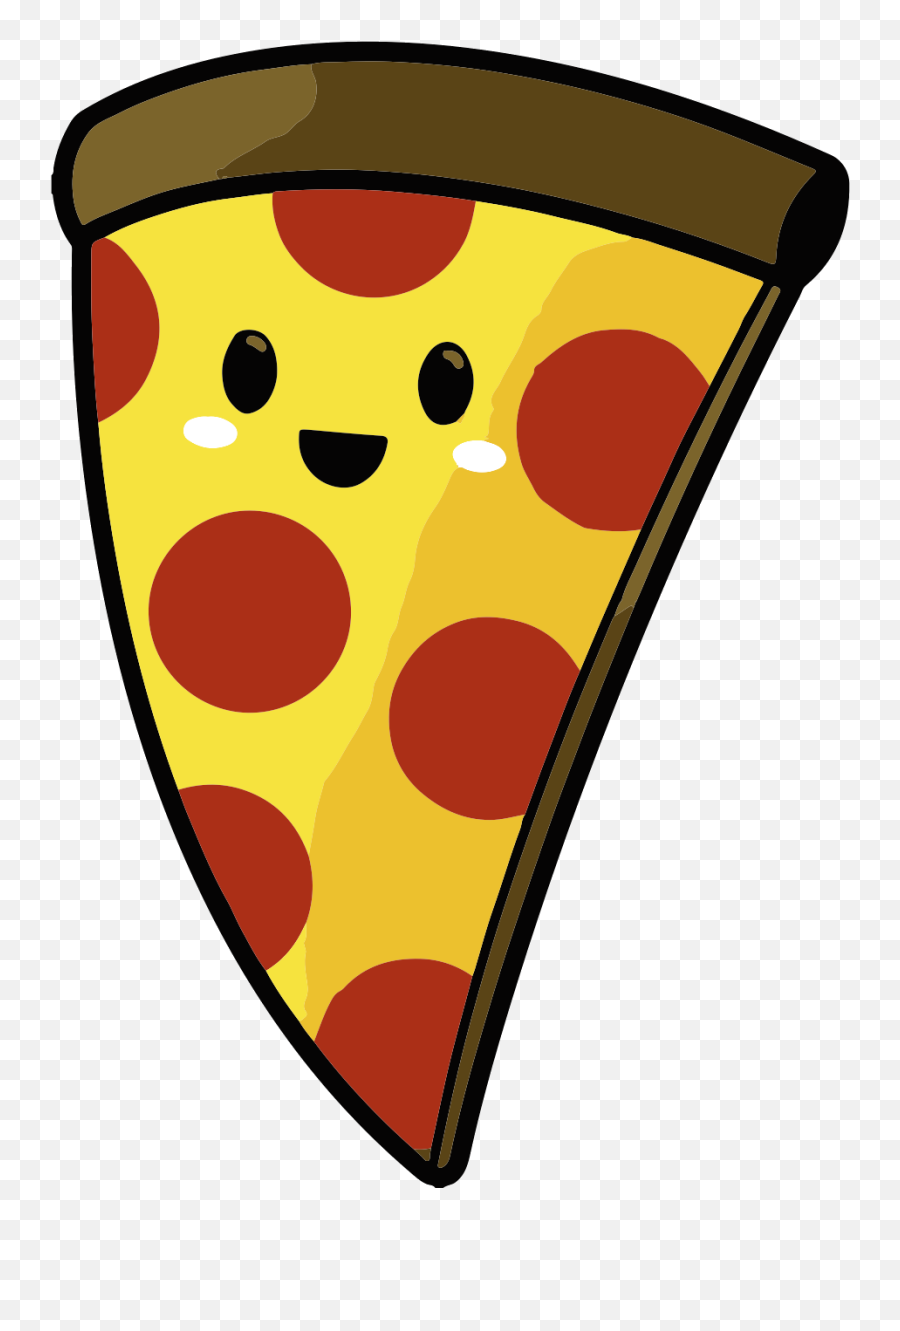 Discord Bot - Pizza Bot Discord Clipart Full Size Clipart Animated Pizza With Face Emoji,Funny Discord Emojis